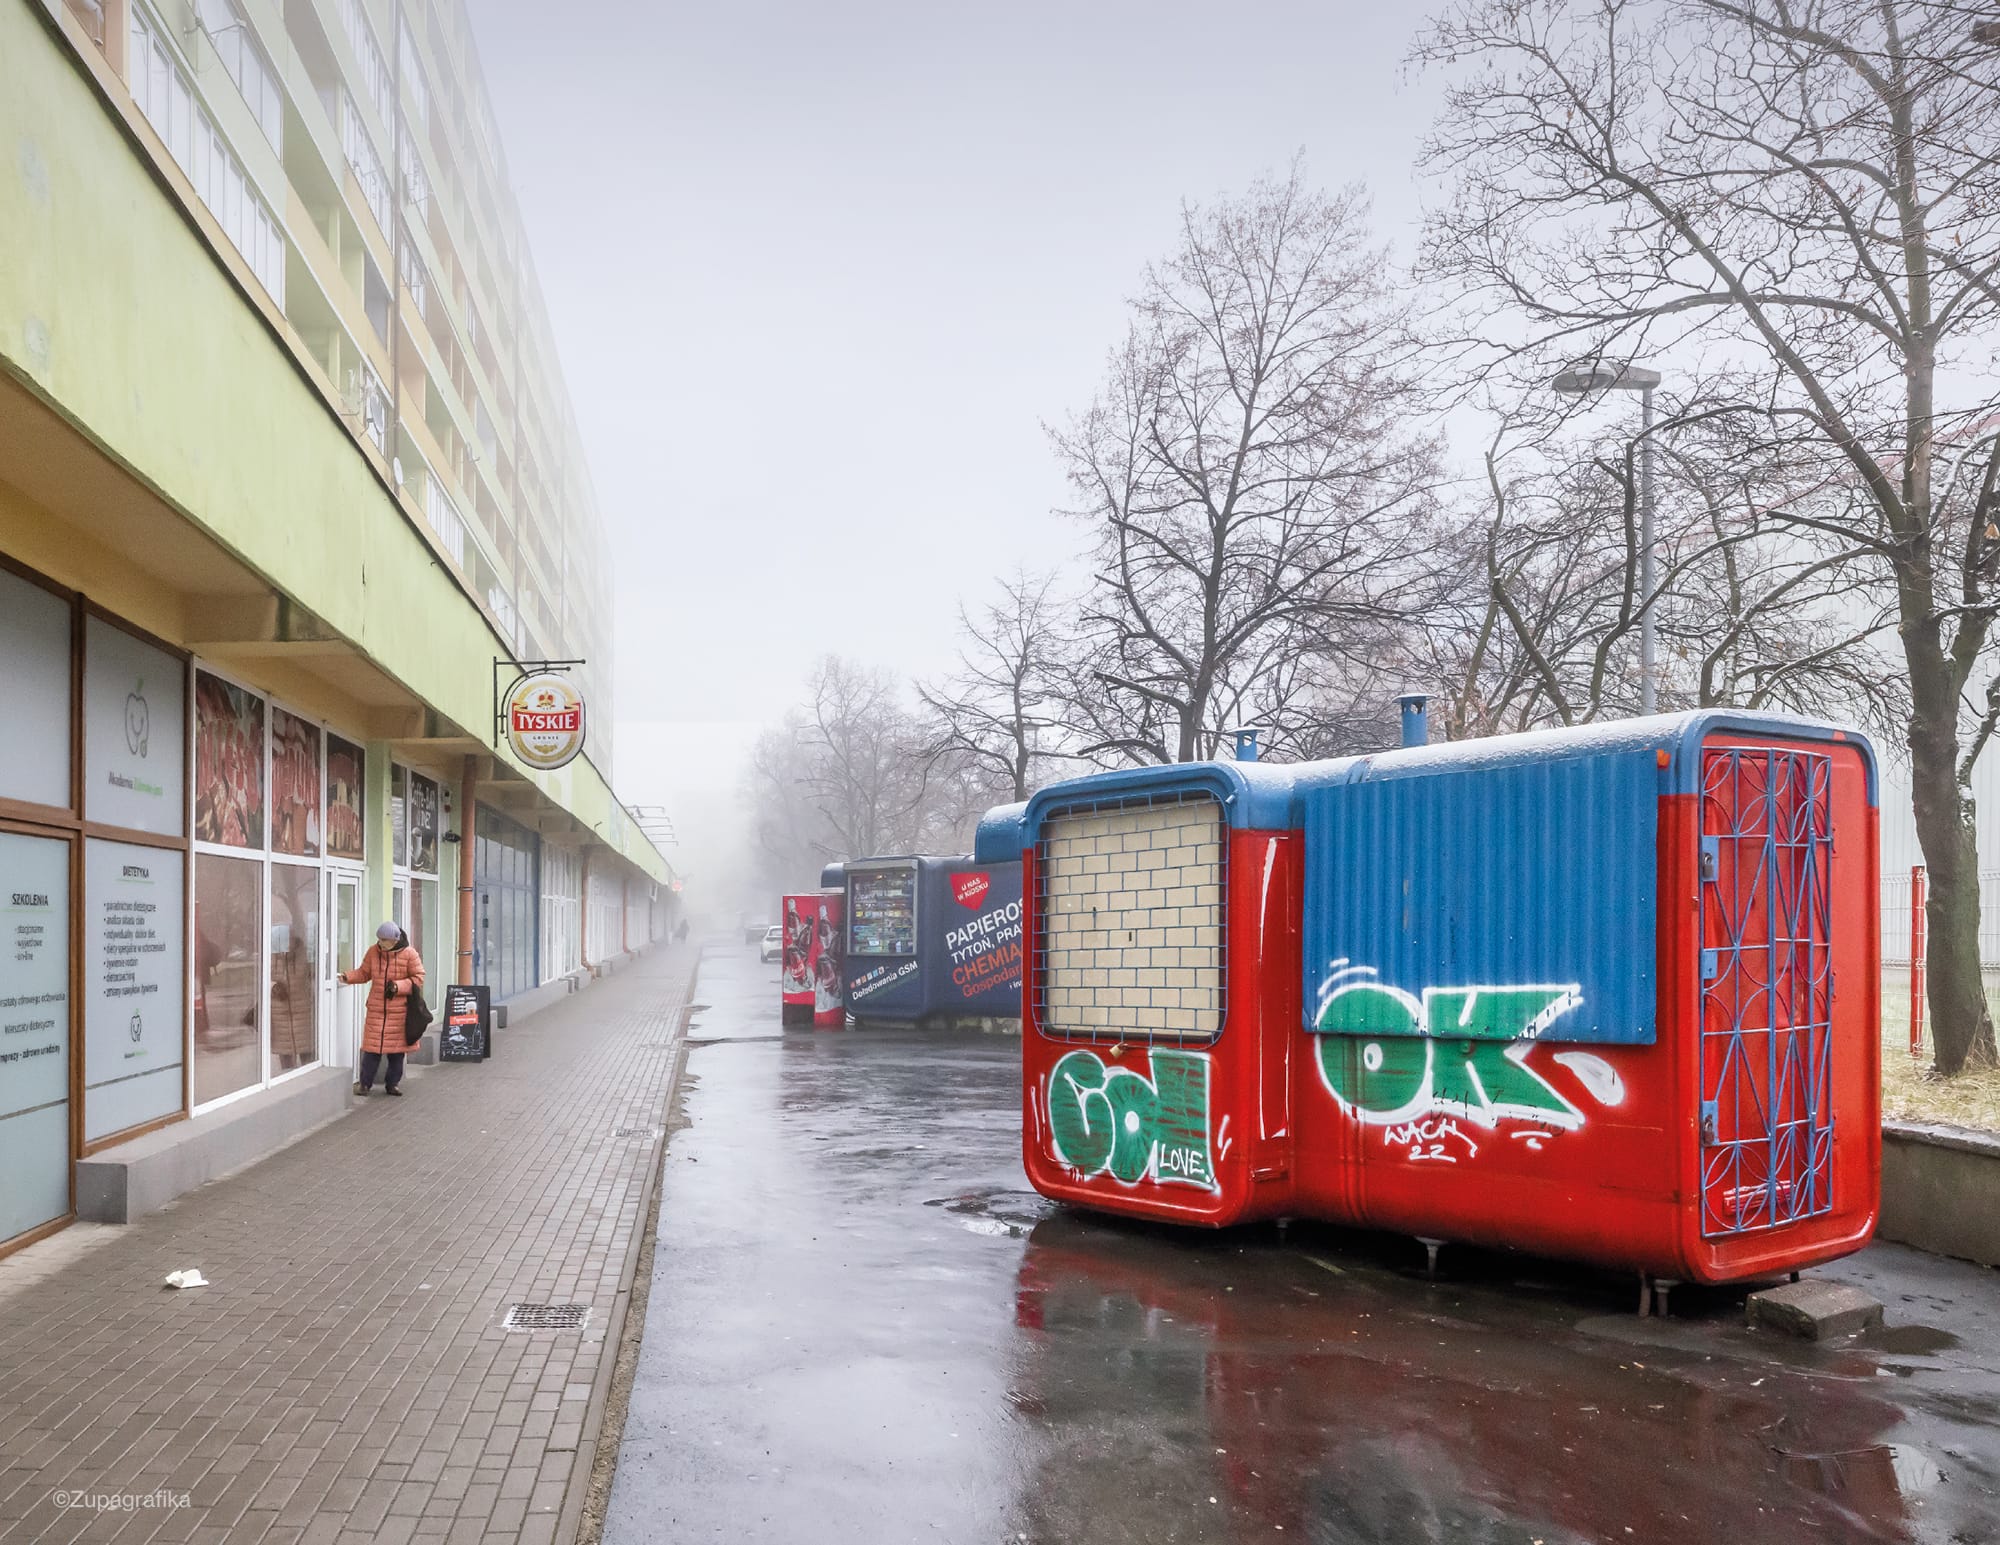 a photograph of a series of modernist kiosks outside of a shopping center on a foggy day in Poland. the kiosk in the foreground has green graffiti on it that reads "OK"